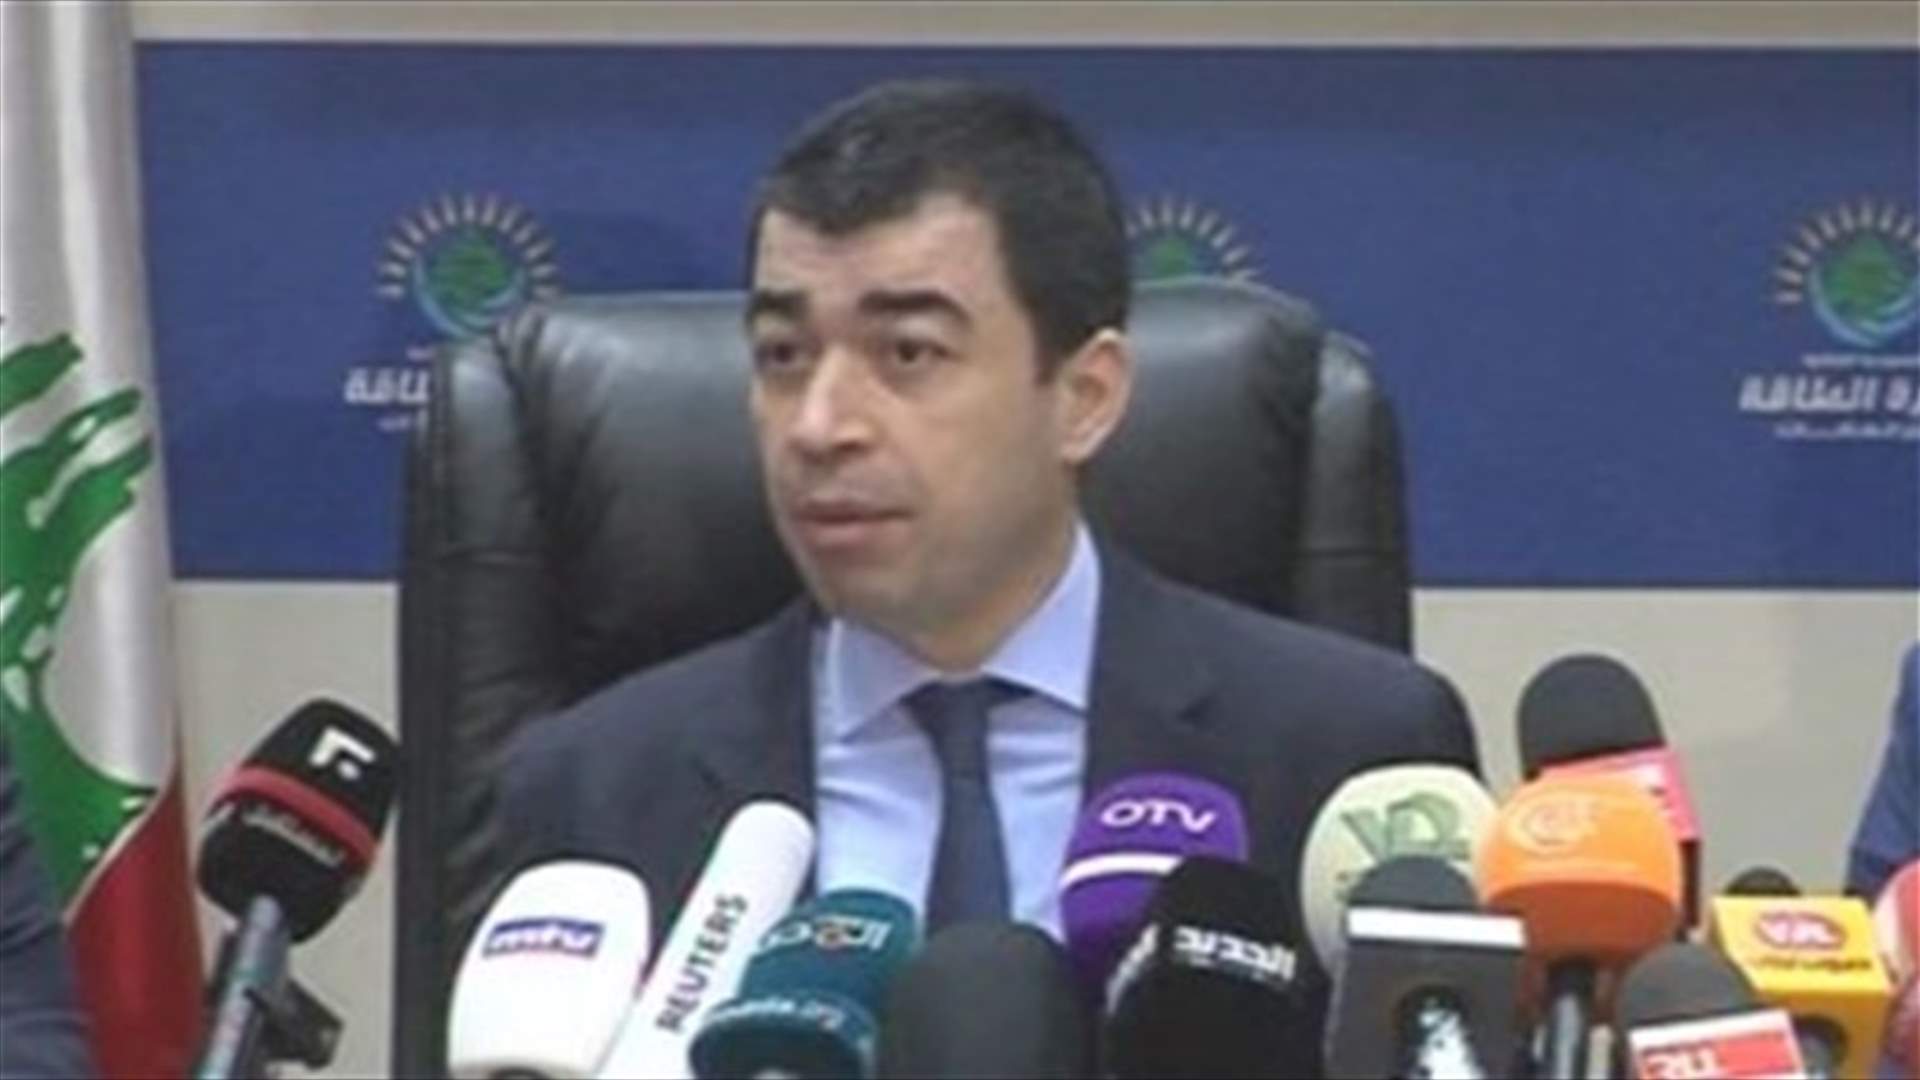 REPORT: Minister Abi Khalil says oil drilling to start as of 2019